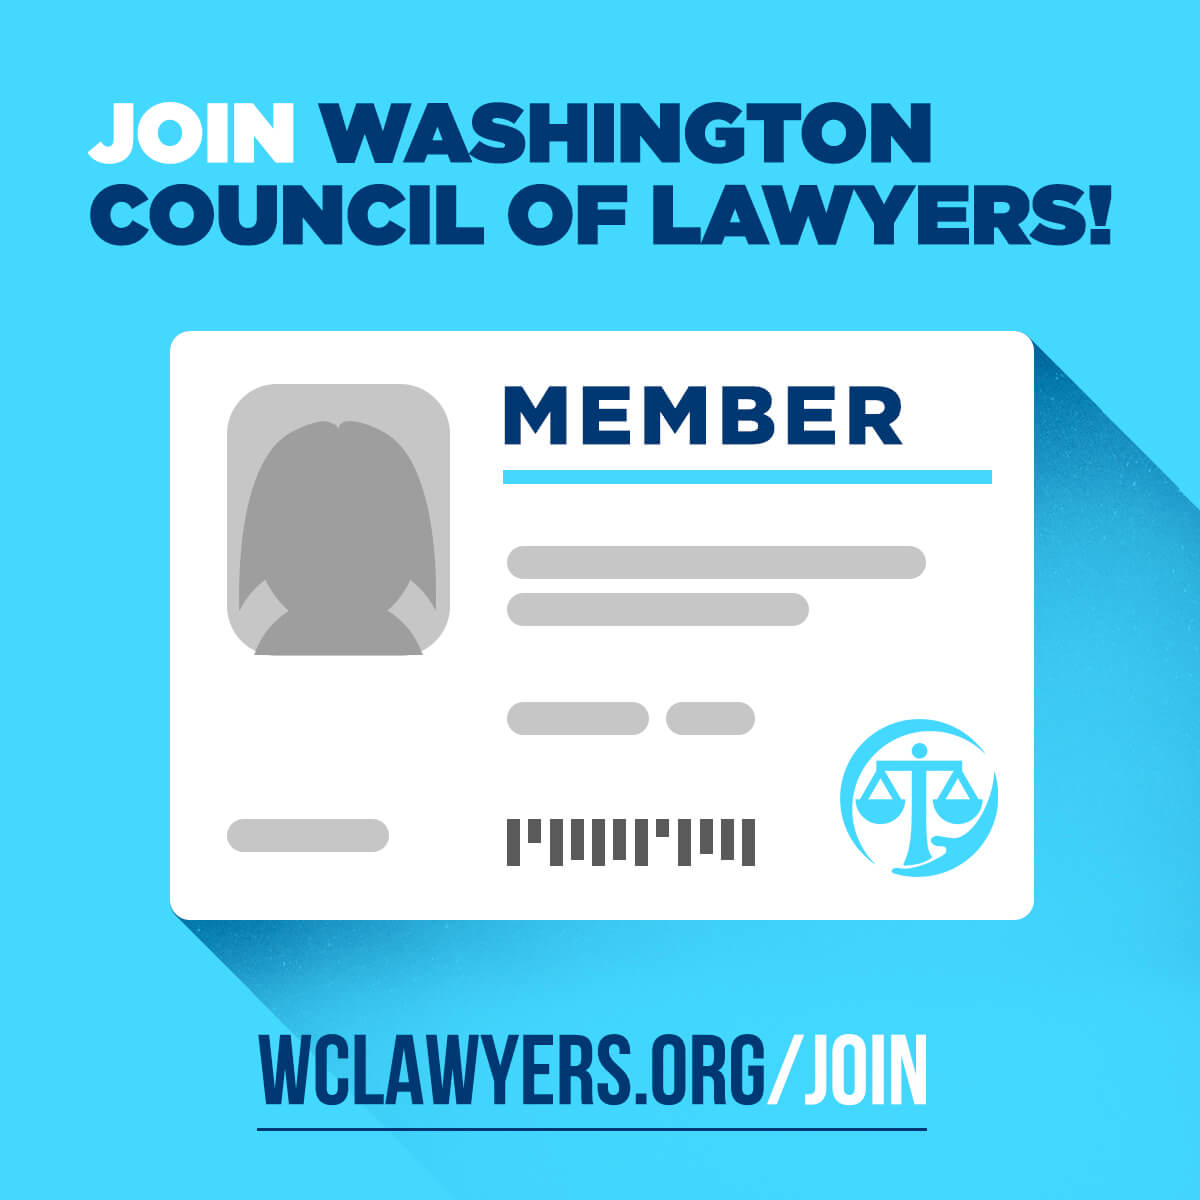 Graphic: Join Washington Council of Lawyers